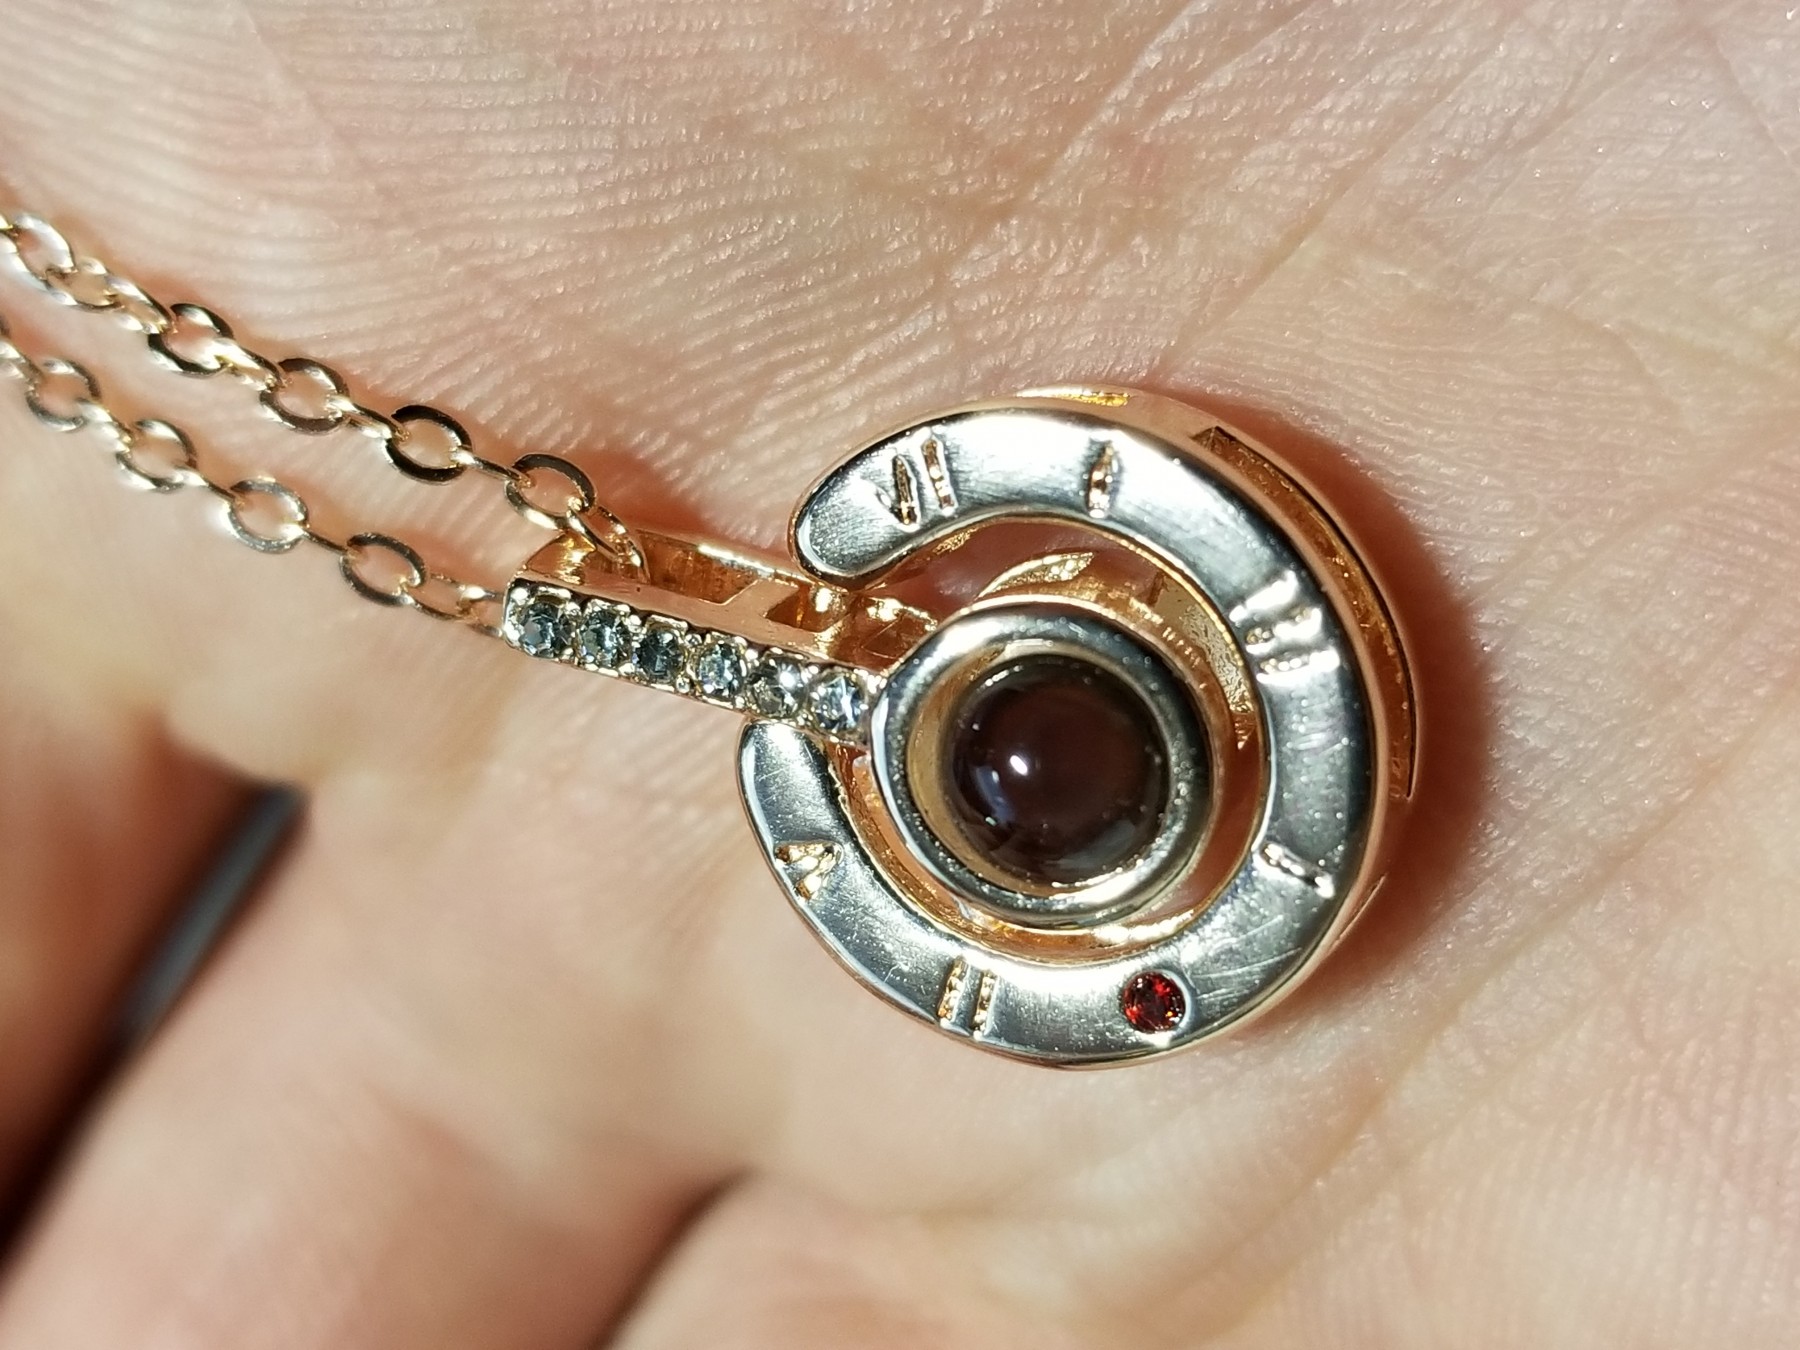 A nice rose gold necklace with a nice surprise hidden in the lens.